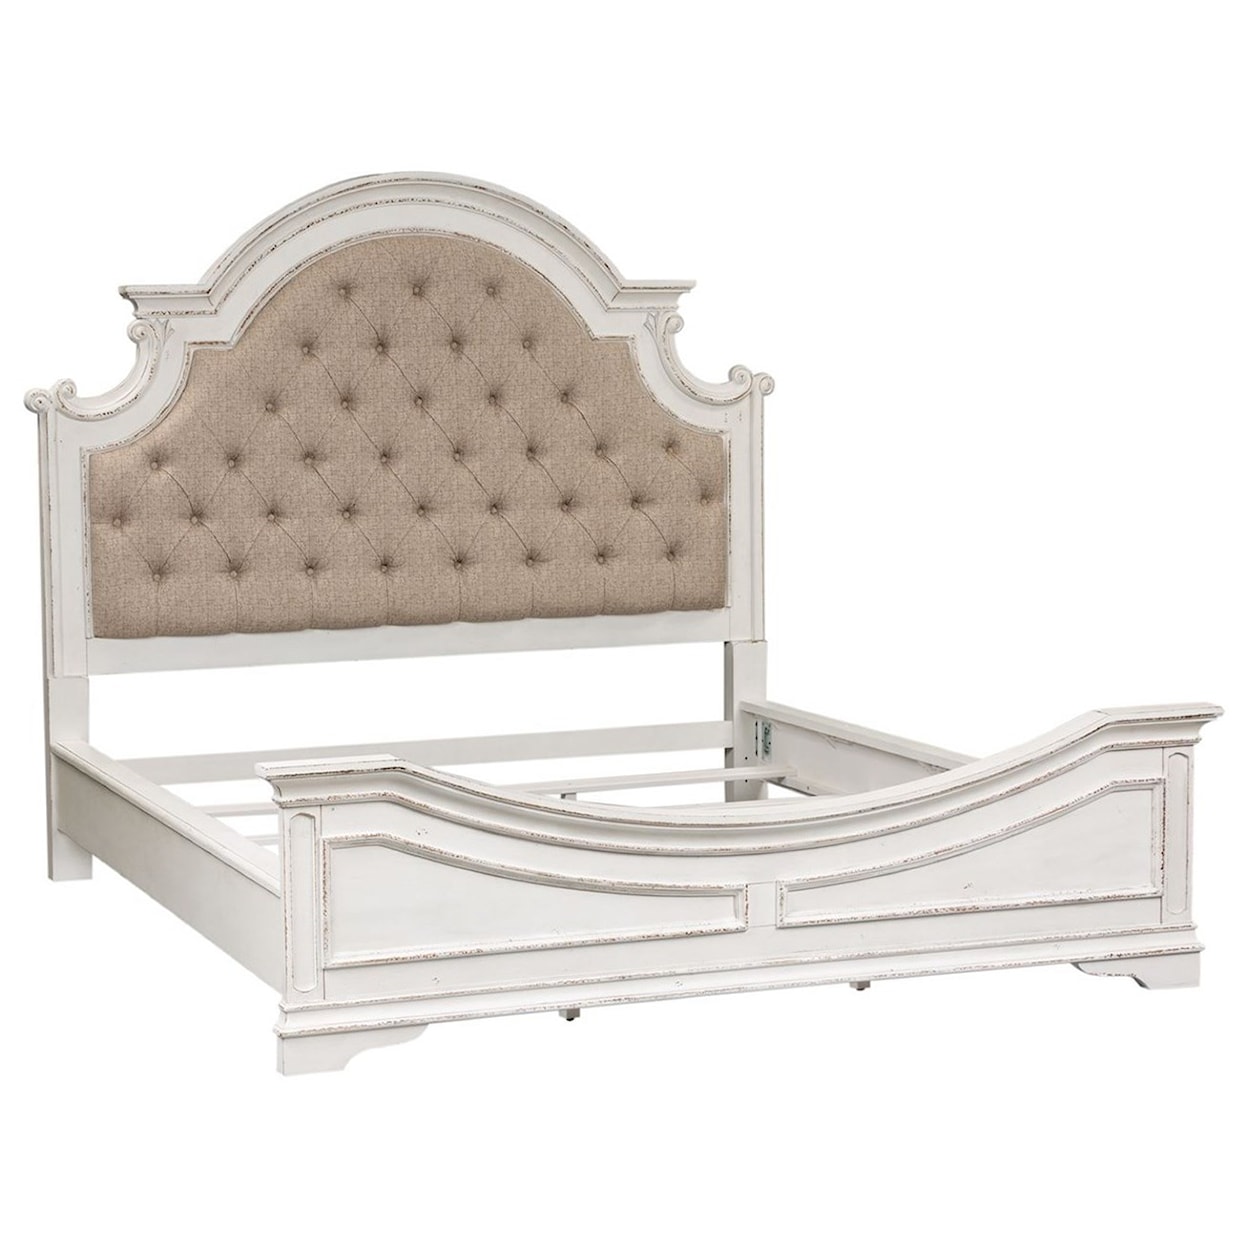 Liberty Furniture Magnolia Manor King Upholstered Bed